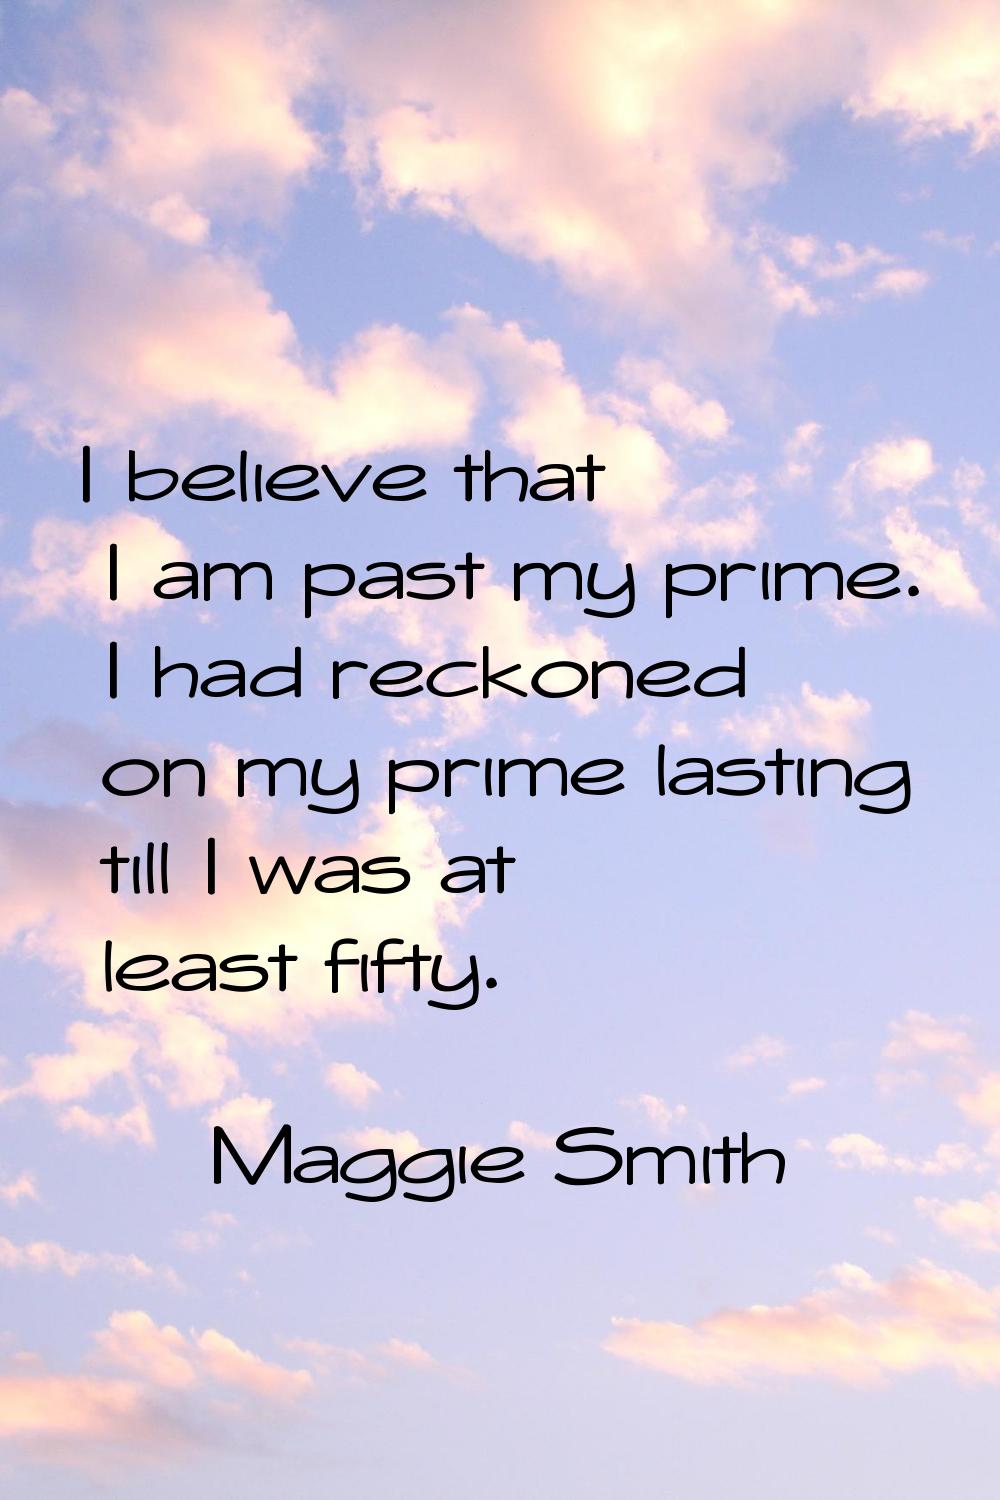 I believe that I am past my prime. I had reckoned on my prime lasting till I was at least fifty.